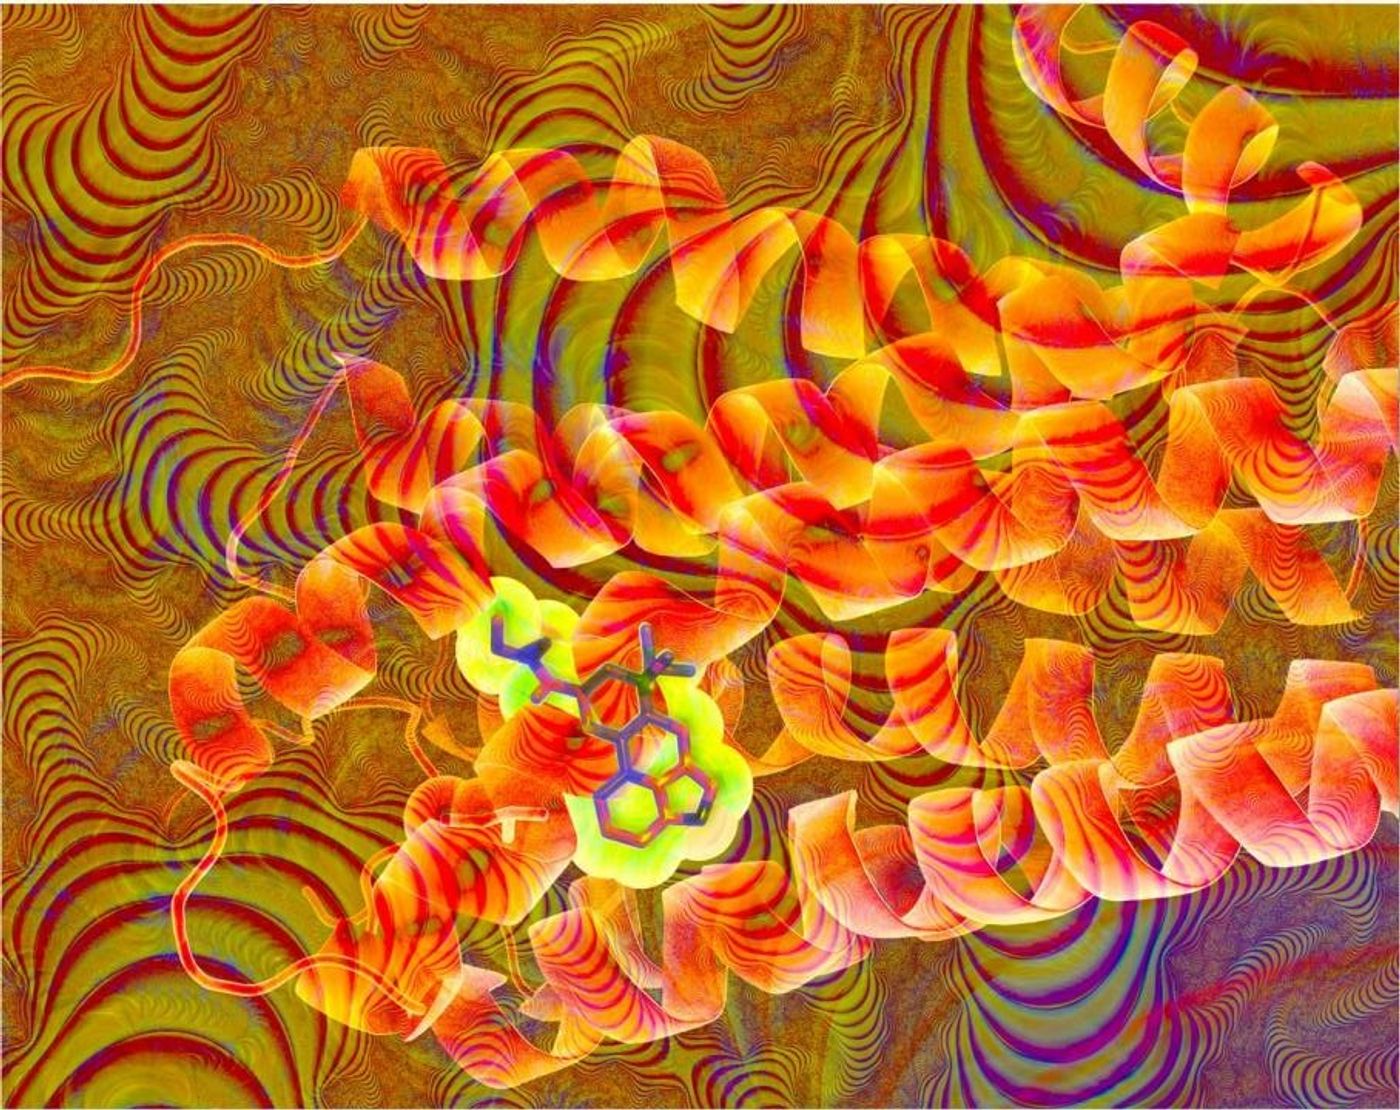 This image is an artistic representation of the chemical structure of LSD -- highlighted in yellow -- interlocking into a red-orange ribbon diagram of the serotonin receptor. / Credit: Annie Spikes